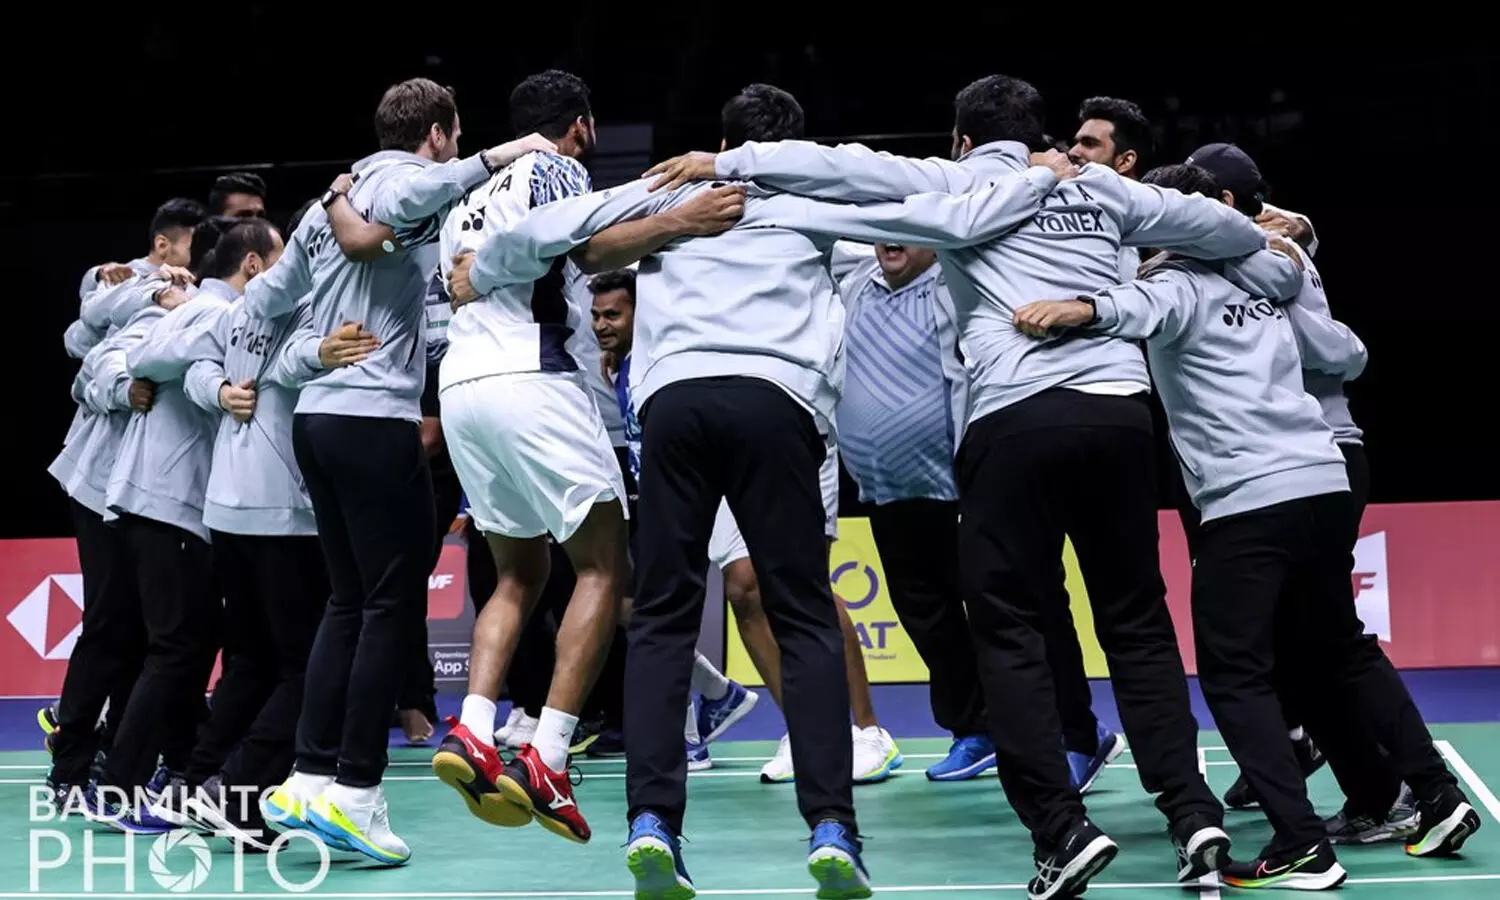 Good news for fans Voot to LIVE stream India vs Indonesia Thomas Cup Final for free